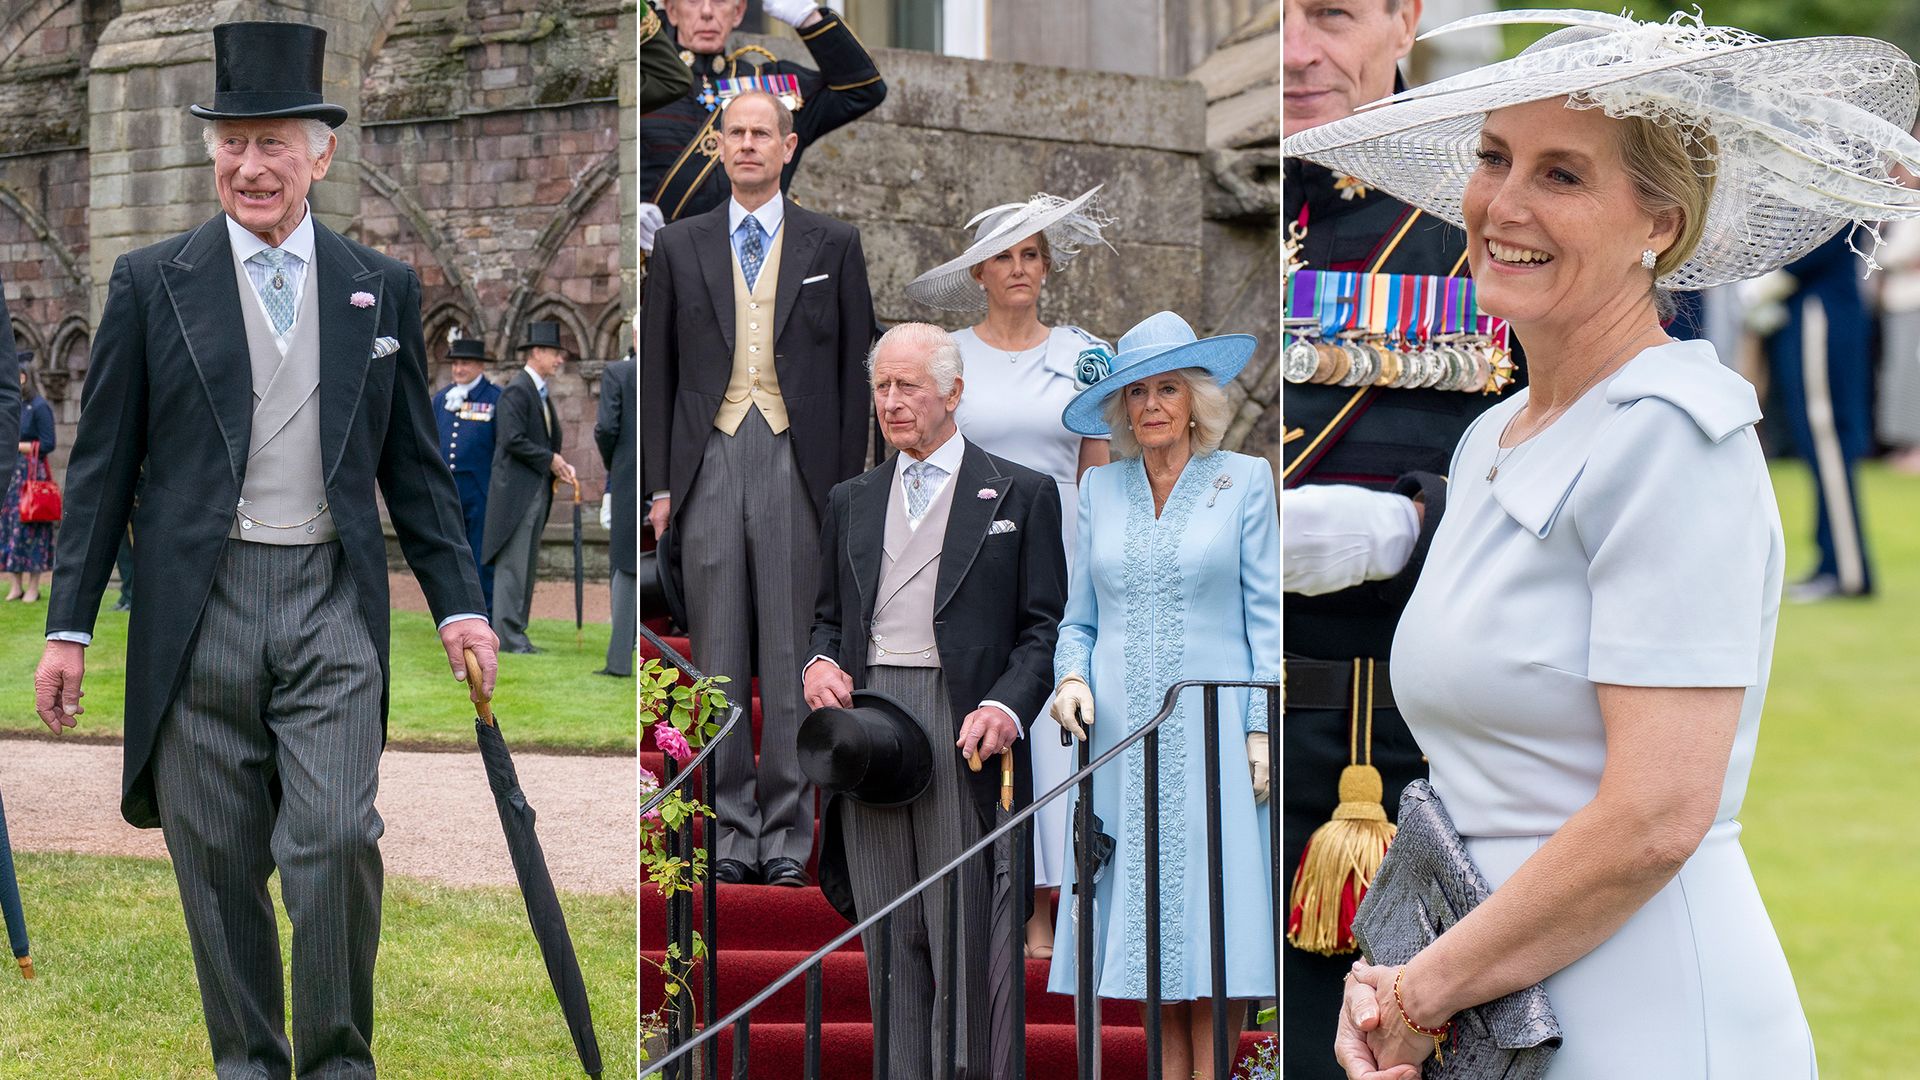 The King and Queen host garden party with Edward and Sophie at Palace of Holyroodhouse